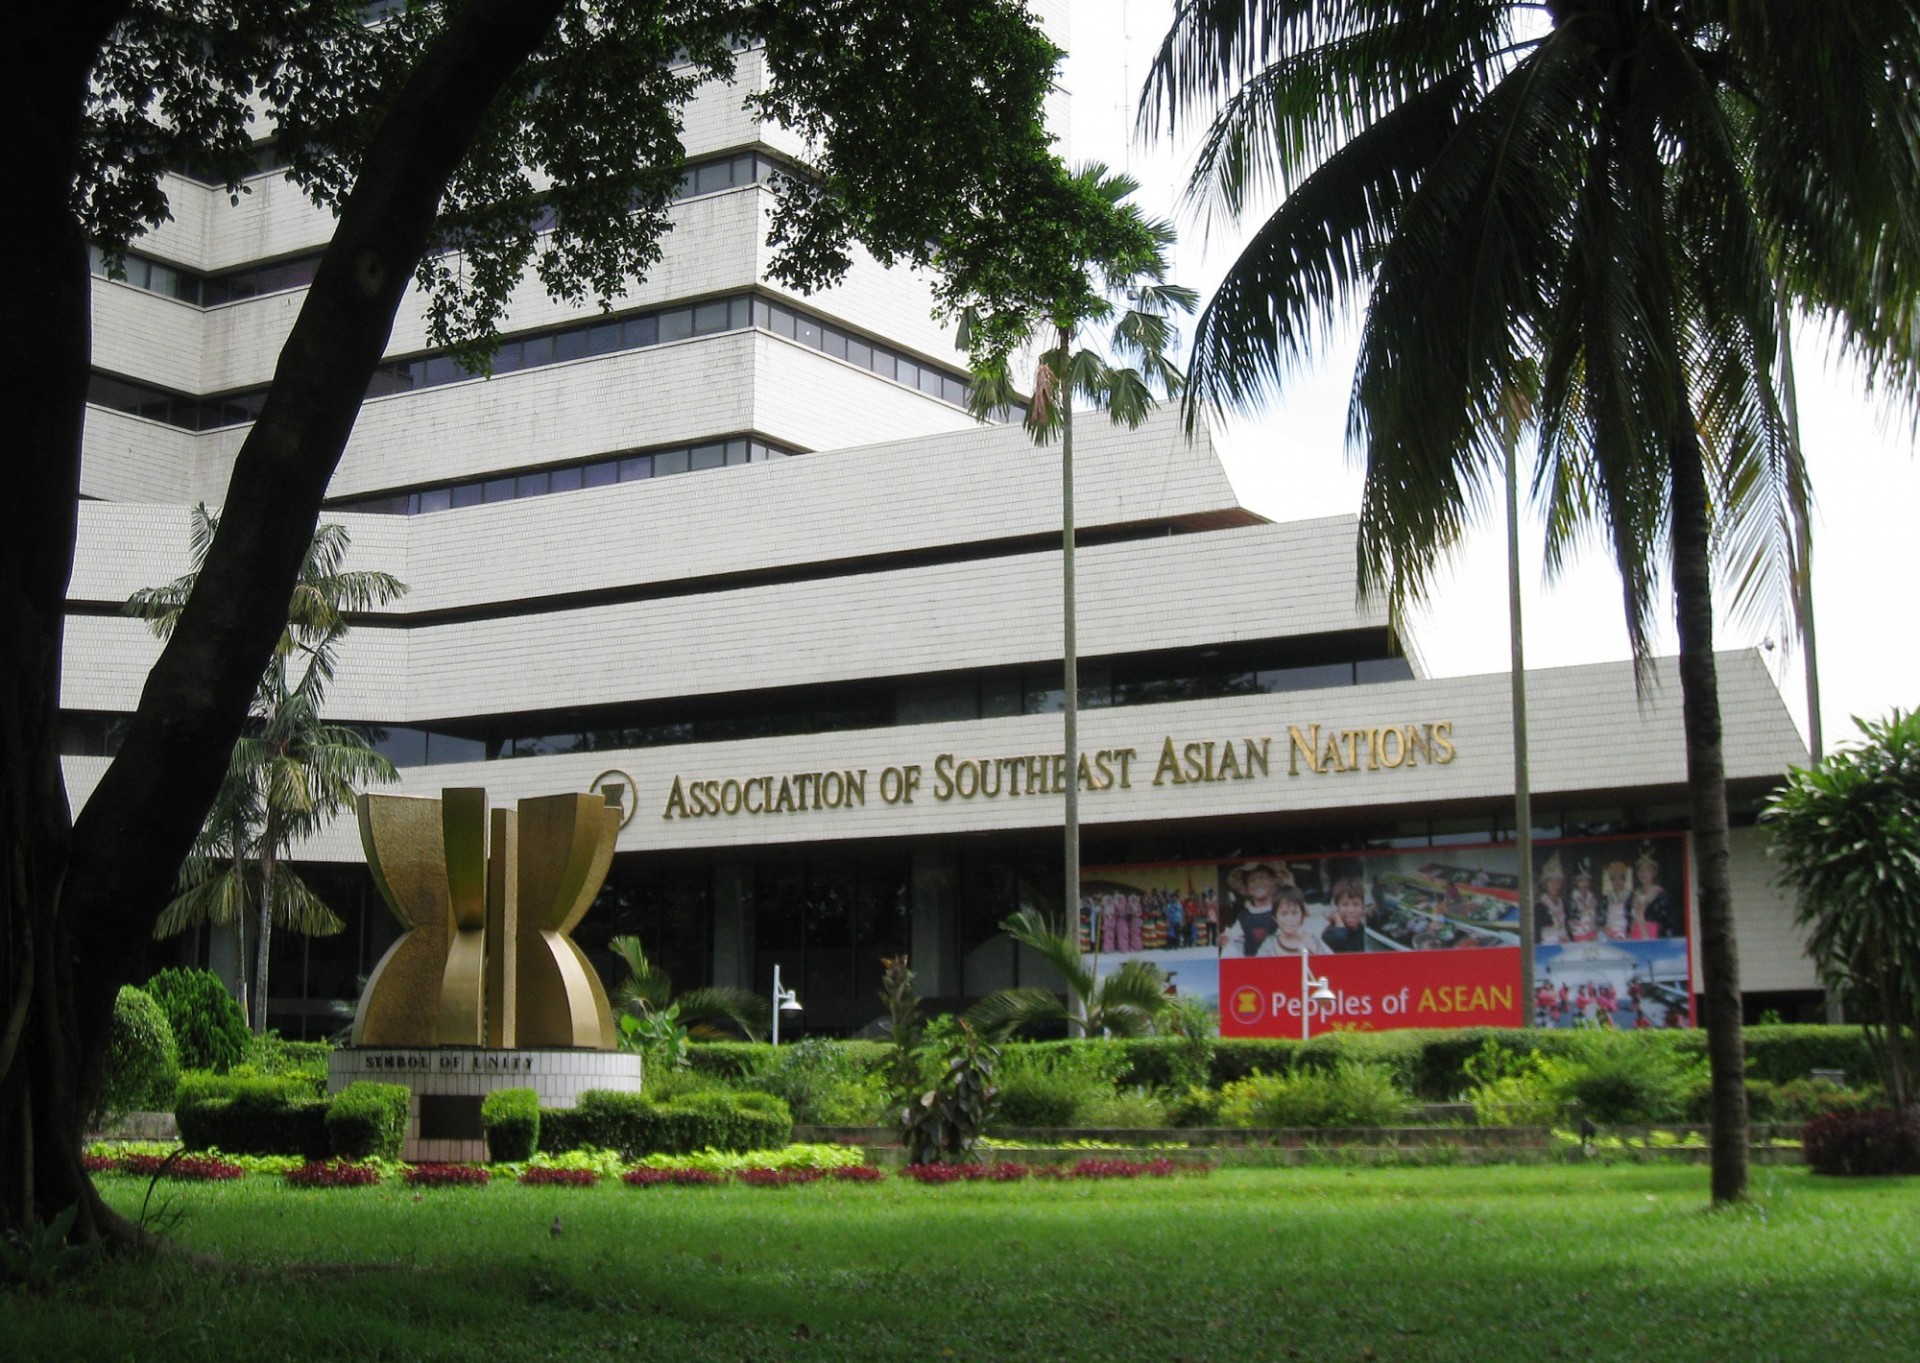 ASEAN_HQ - The headquarter of Association of Southeast Asia Nations (ASEAN) in Jakarta, Indonesia